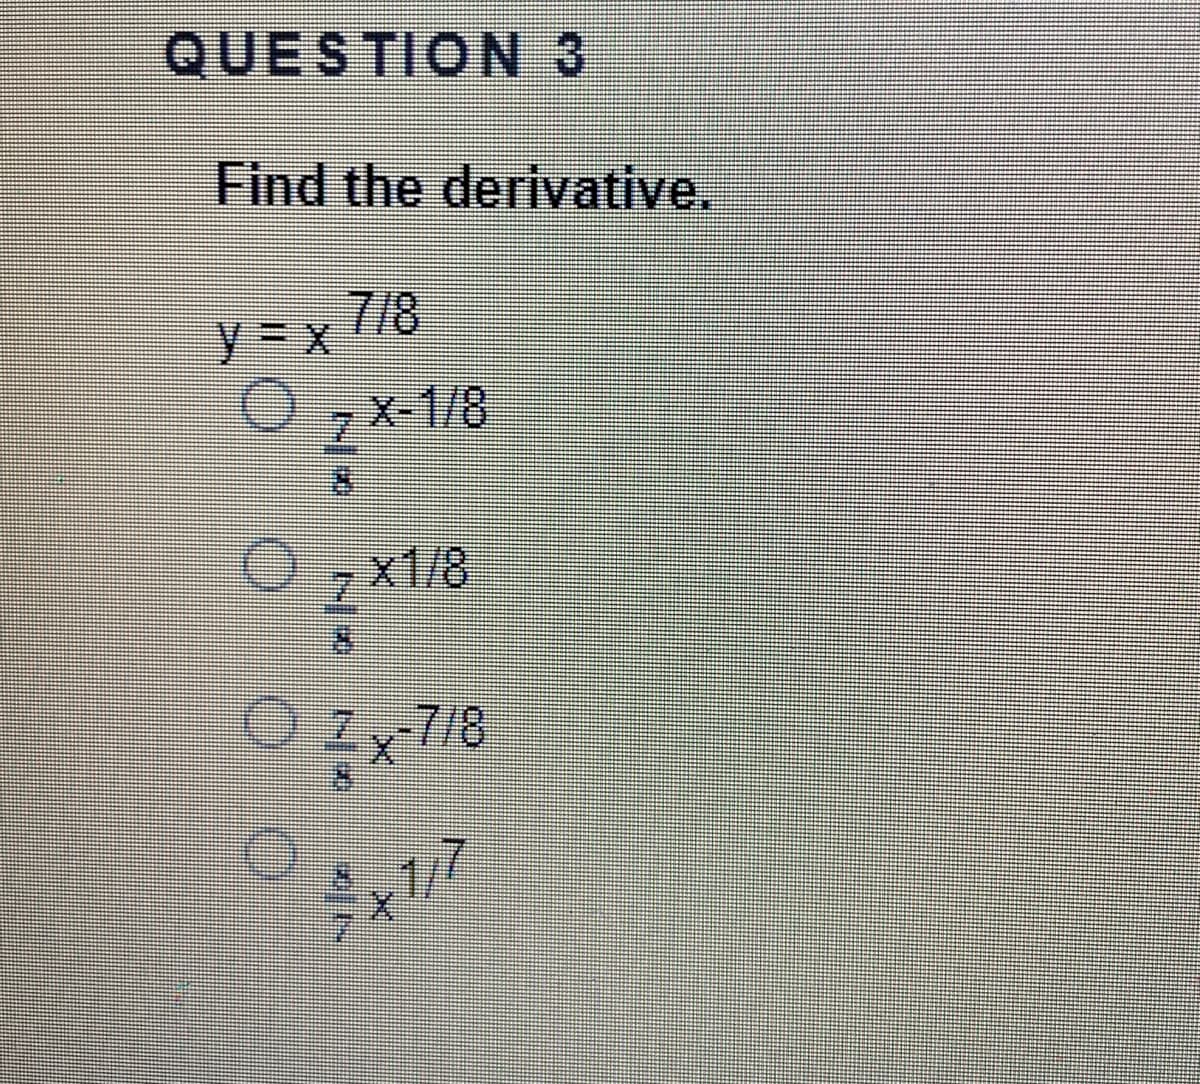 QUESTION 3
Find the derivative.
7/8
zX-1/8
zX1/8
718
-7/8
